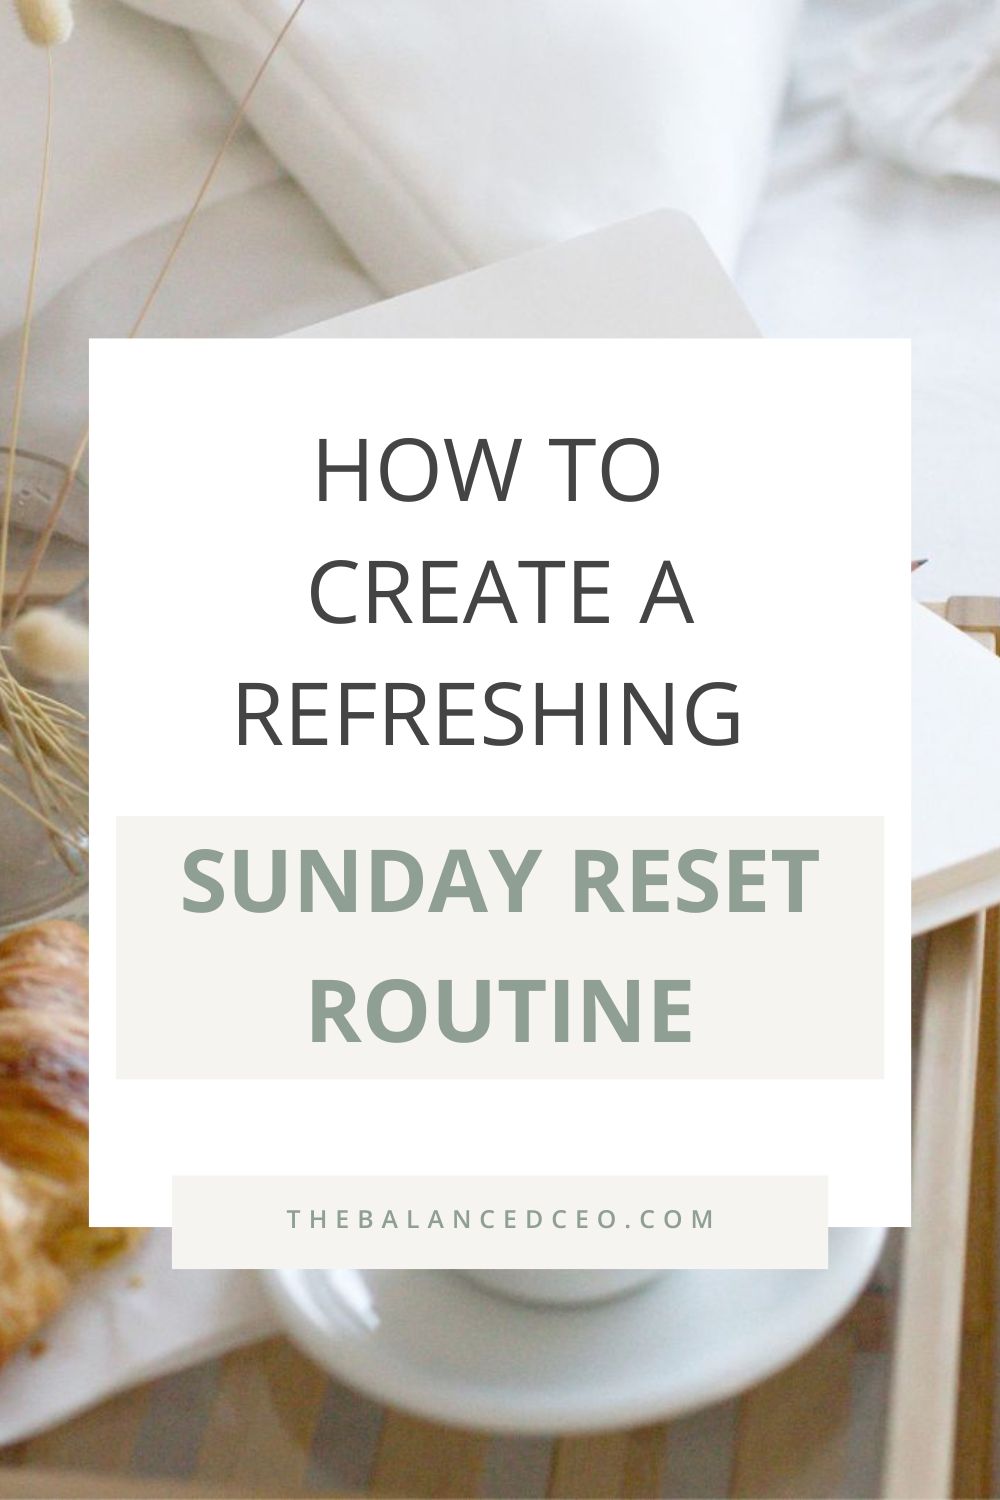 How to Create a Refreshing Sunday Reset Routine